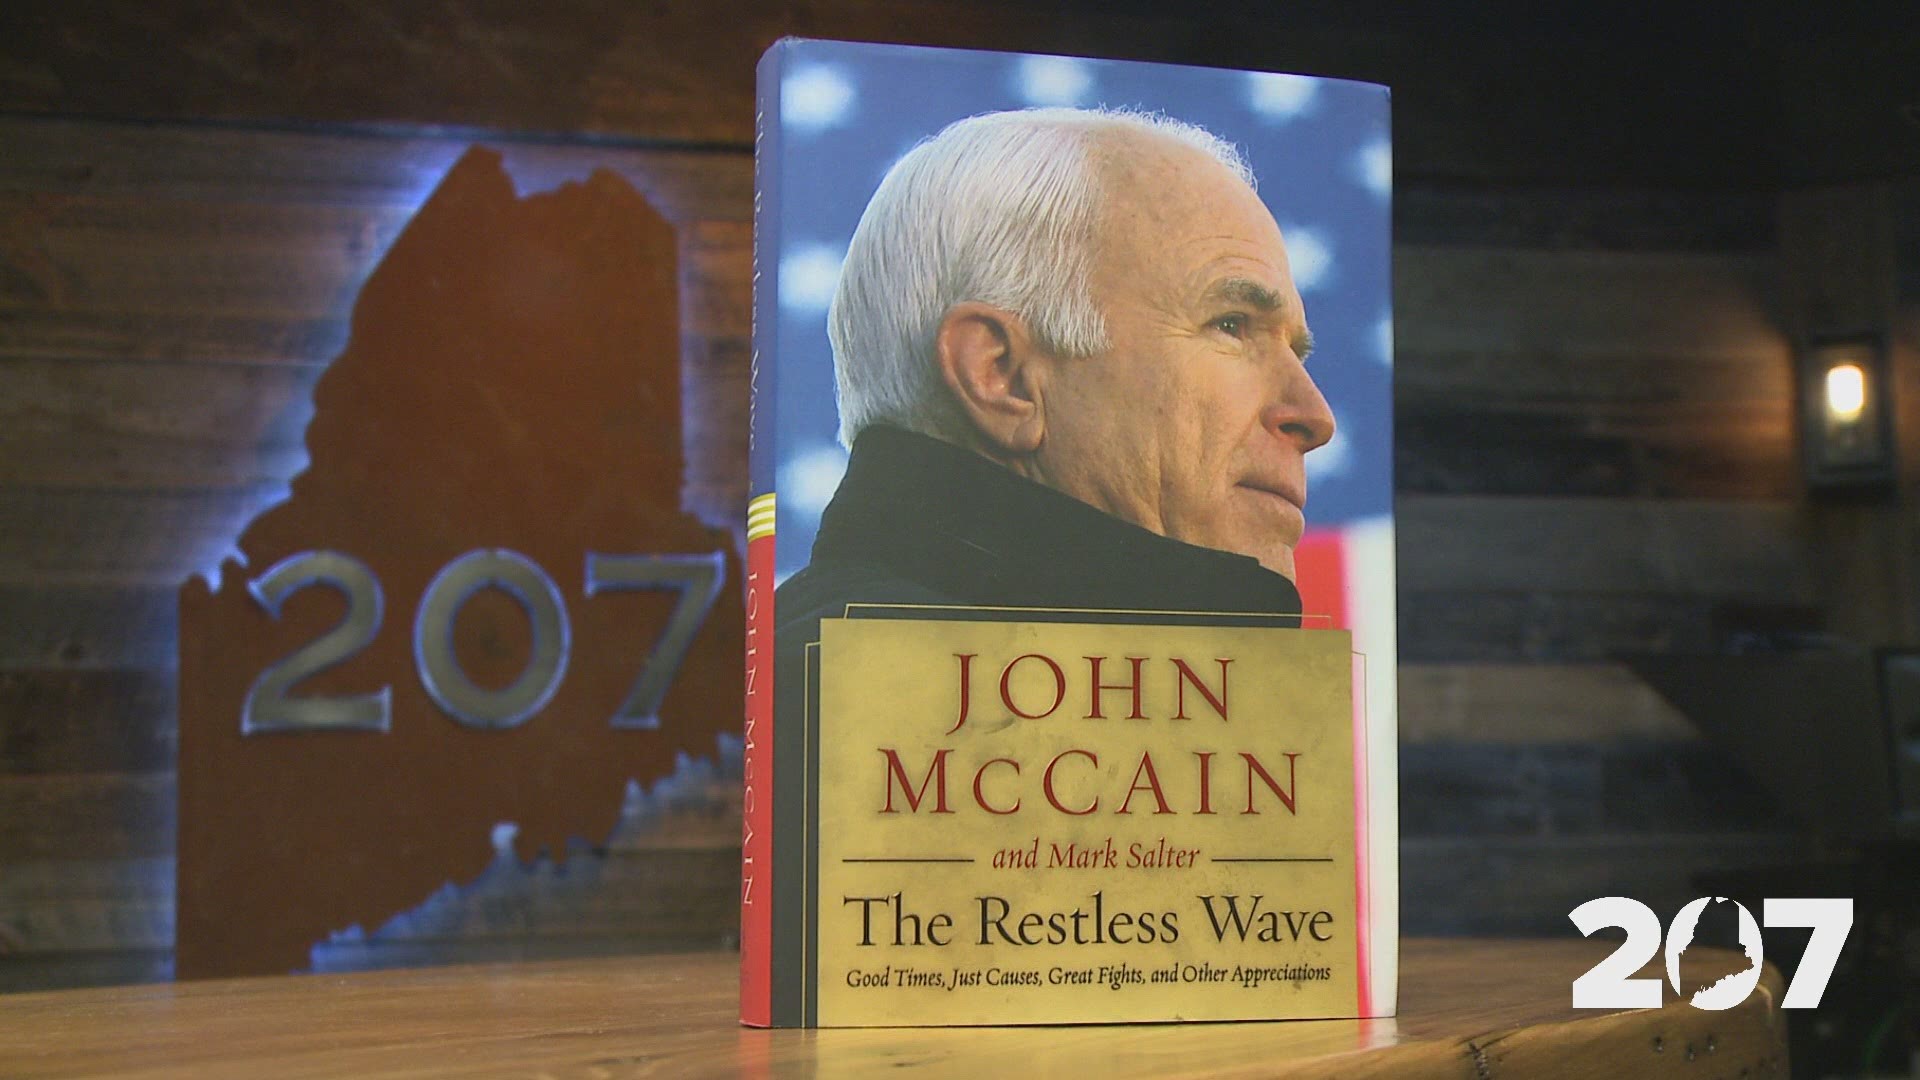 Salter shares his views on President Trump and gives some insight on John McCain's battle with cancer.